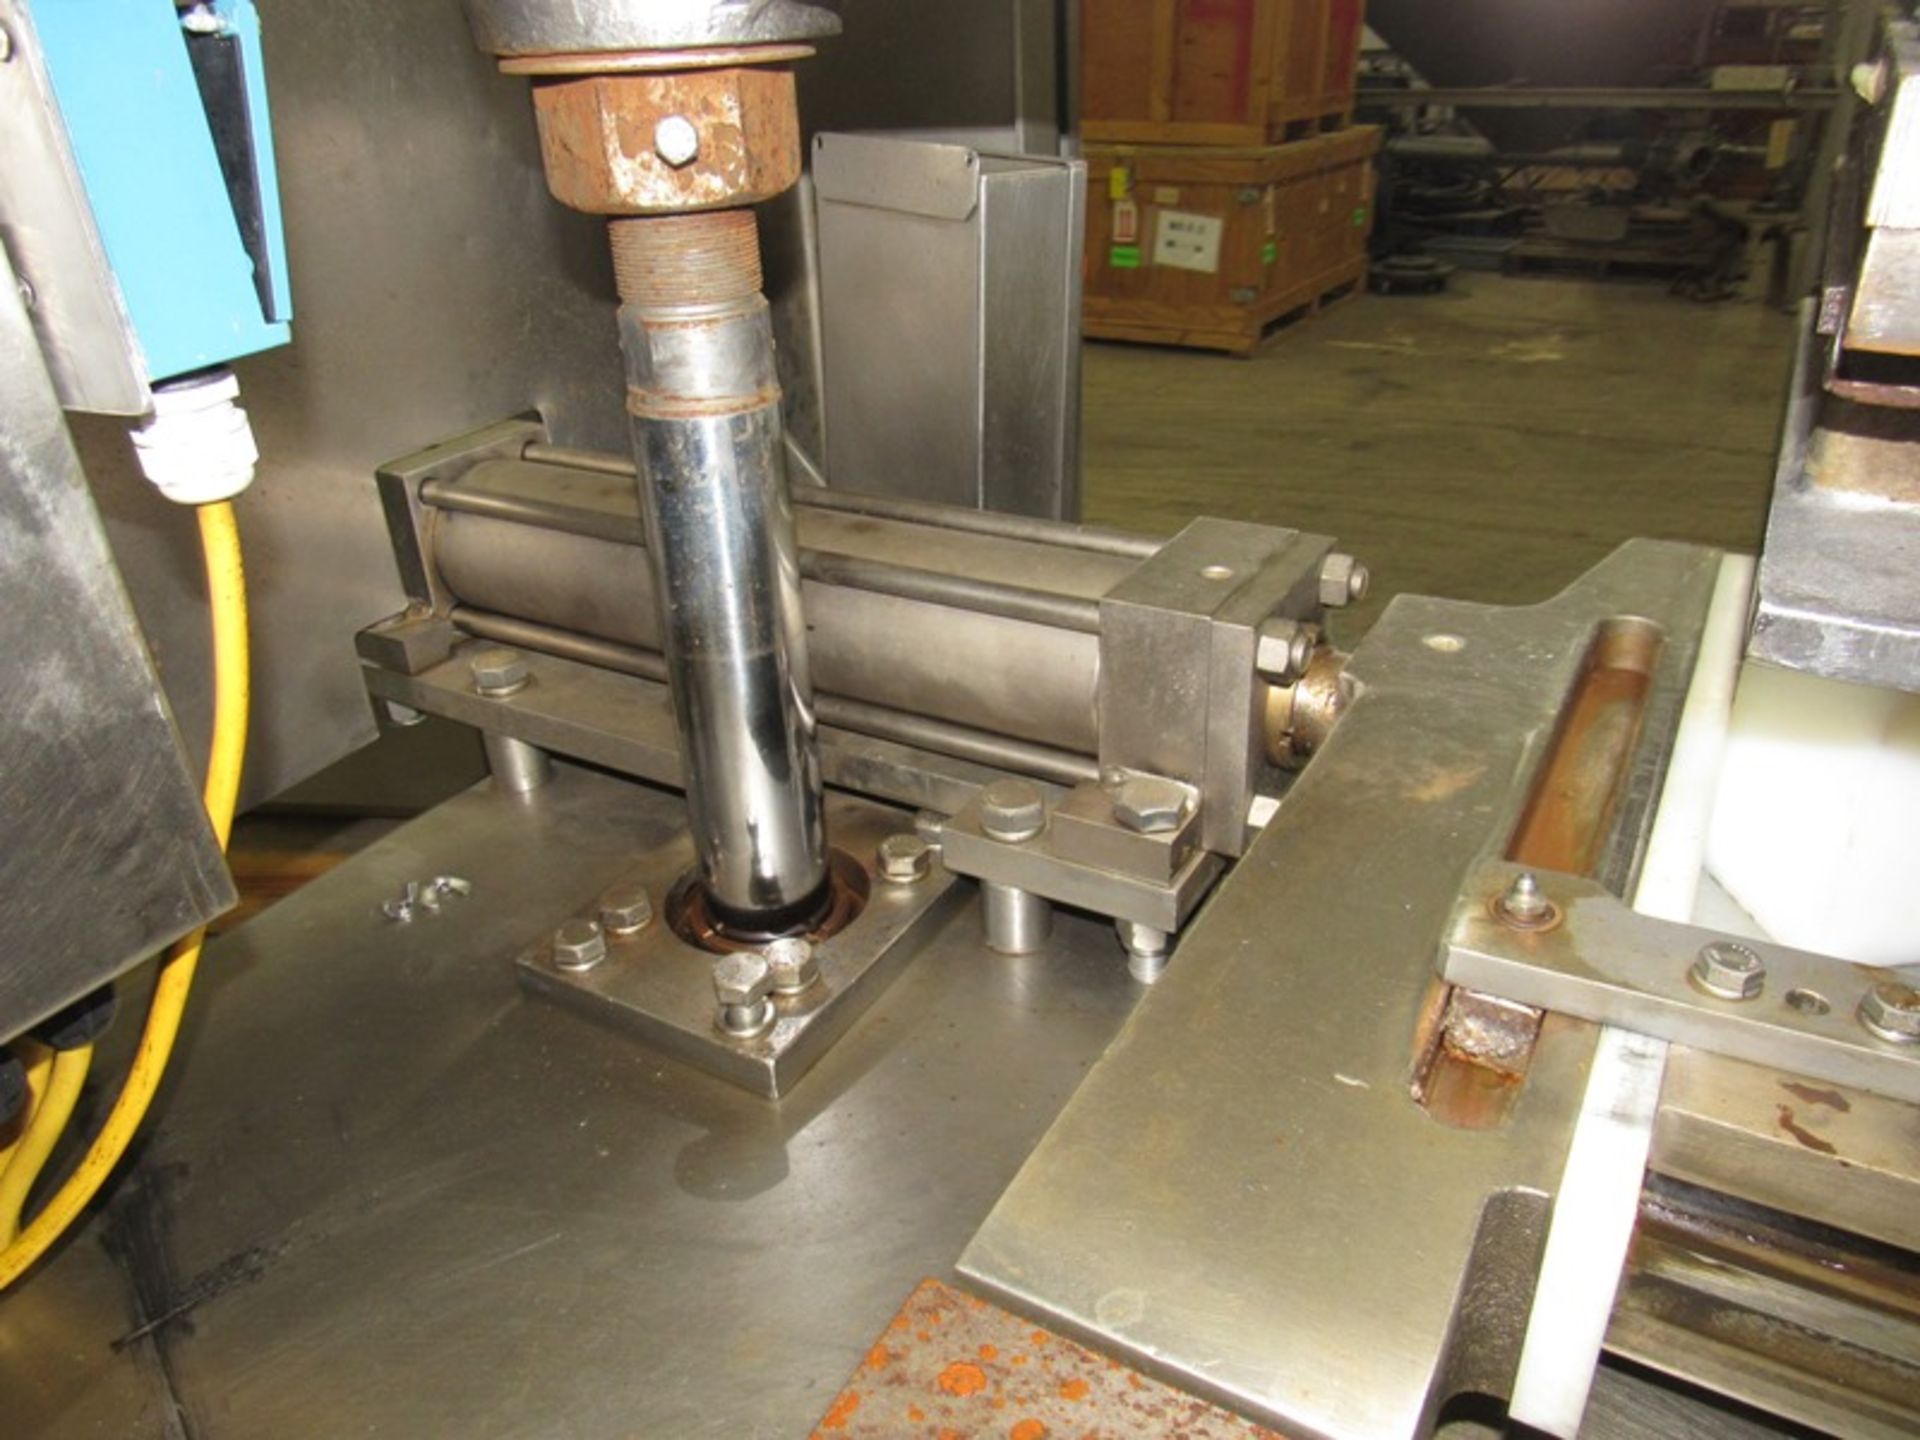 Anco Mdl. 1411 Bacon Press designed to press uniform thickness and width to maximize slicing yields, - Image 10 of 16